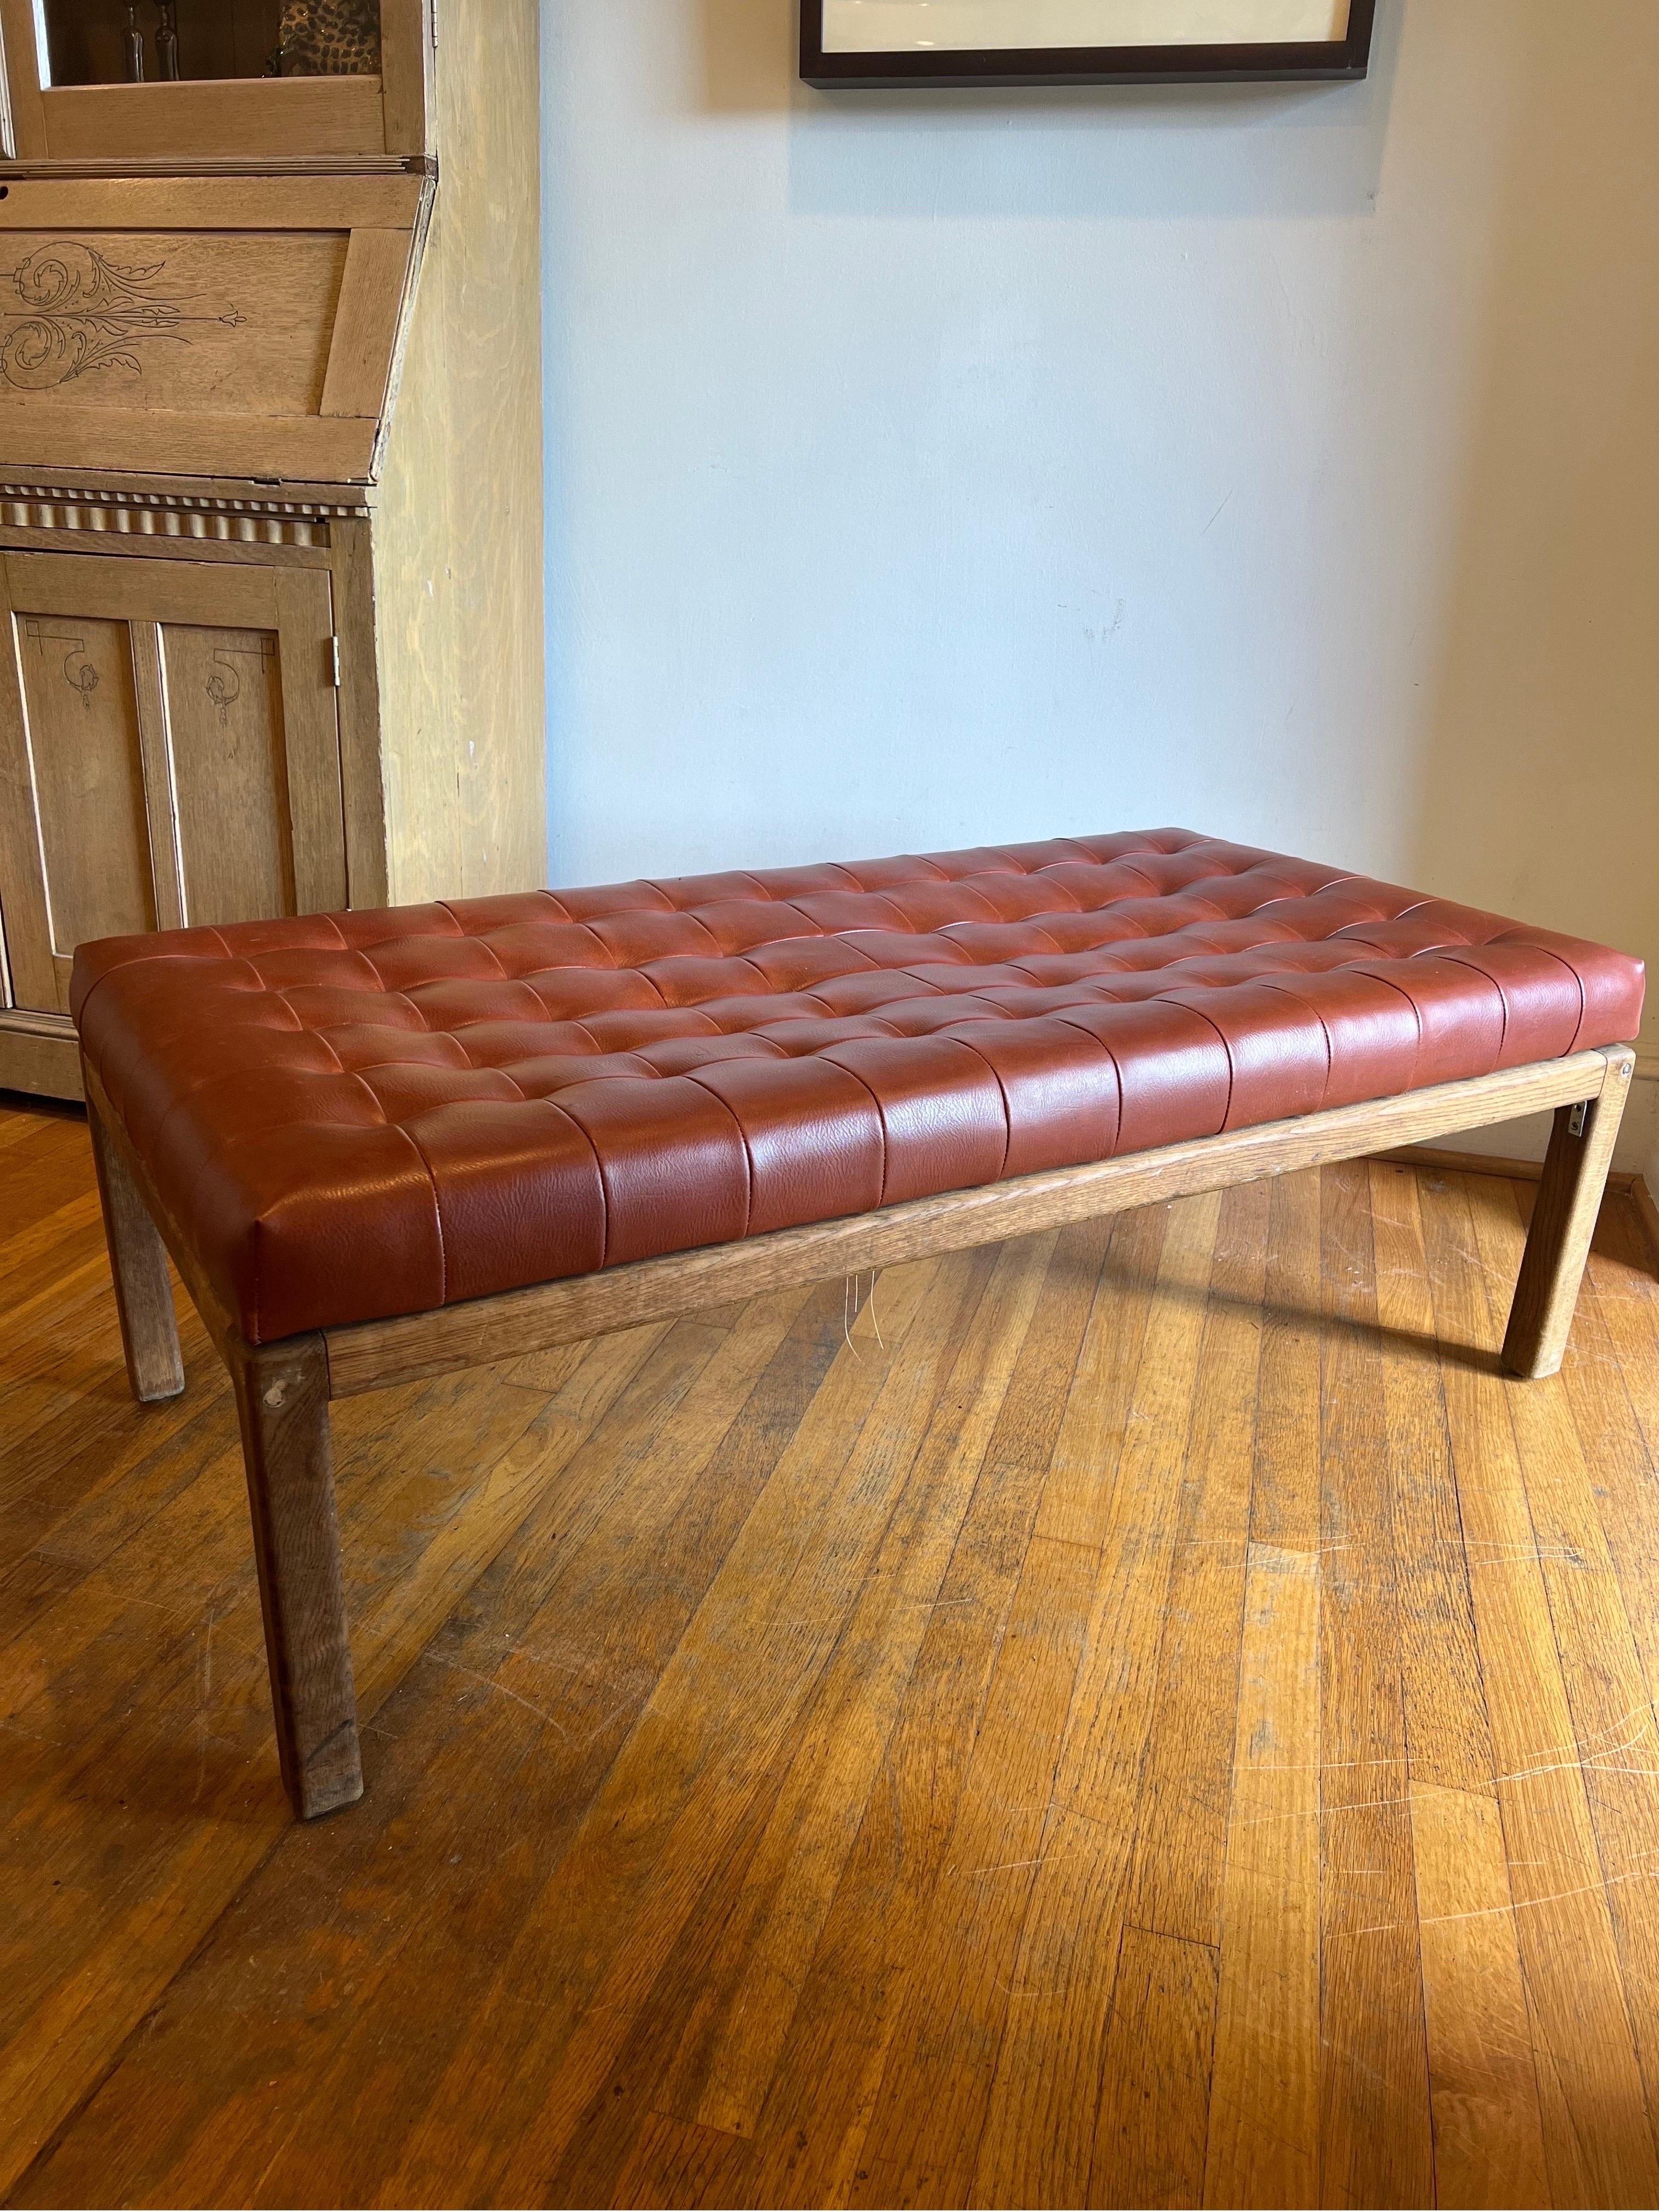 MCM tufted leather/vinyl bench with teak base.  
Deep brown color.  

Original upholstery.  